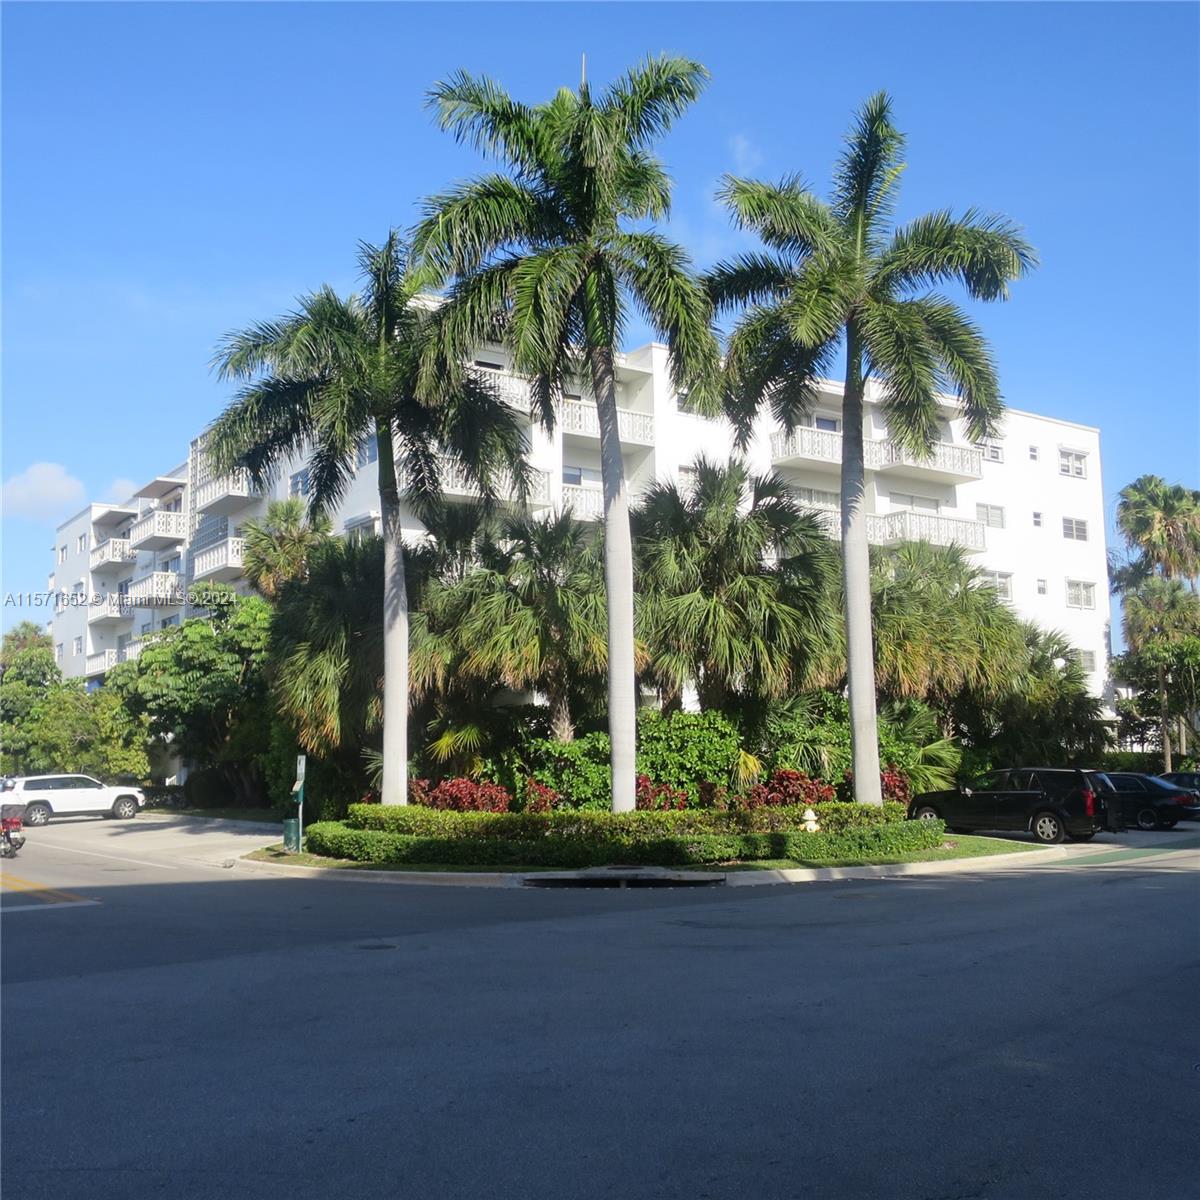 a view of a palm trees in front of a building